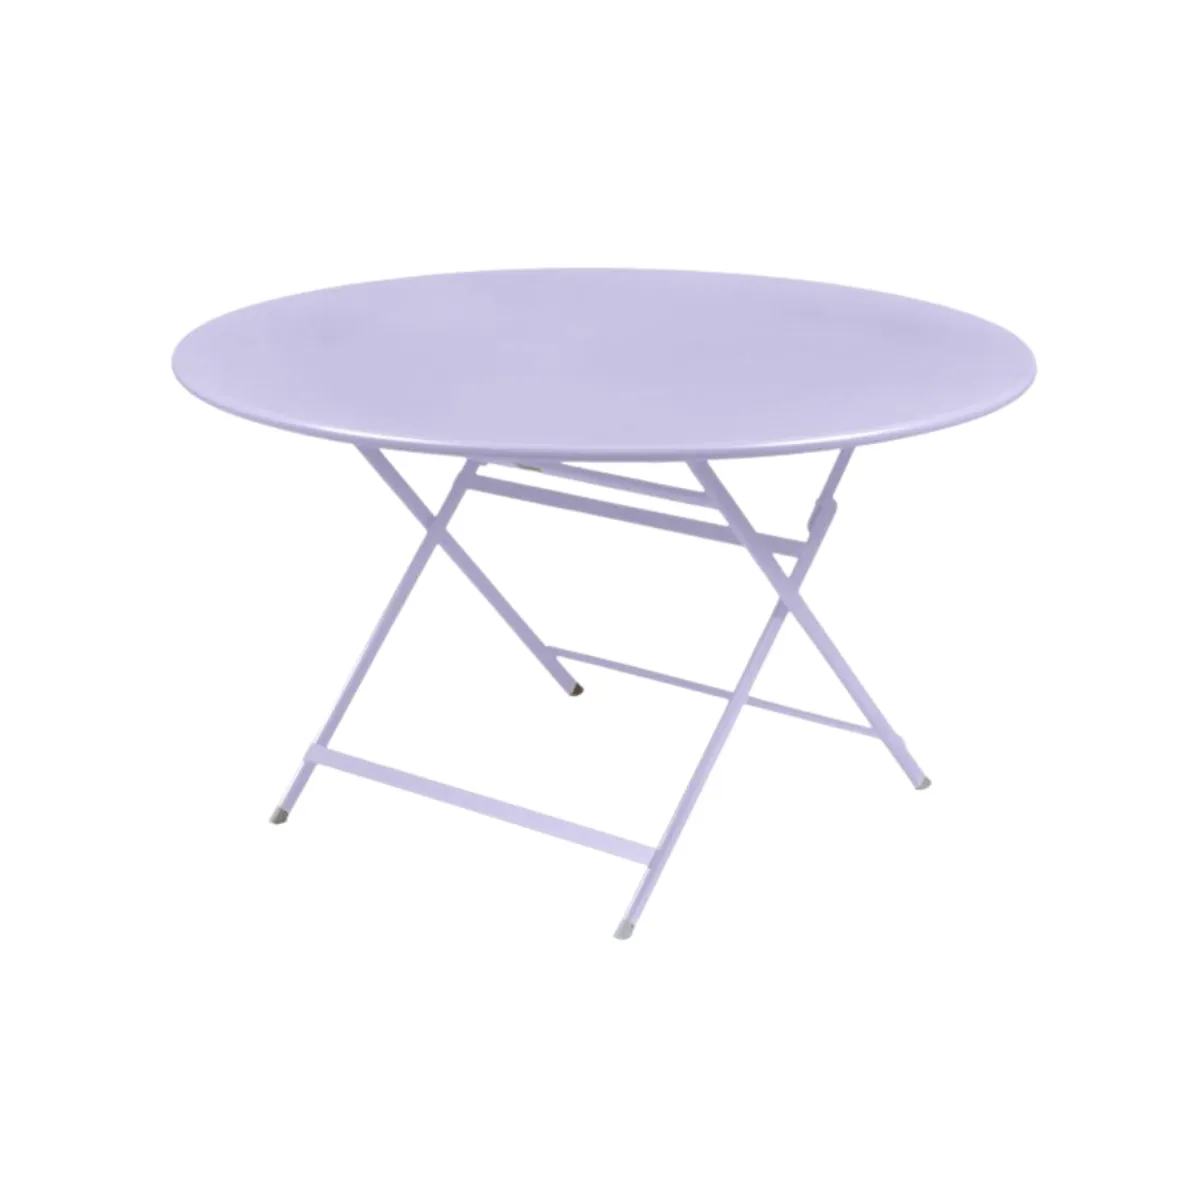 Caractere round folding table 3